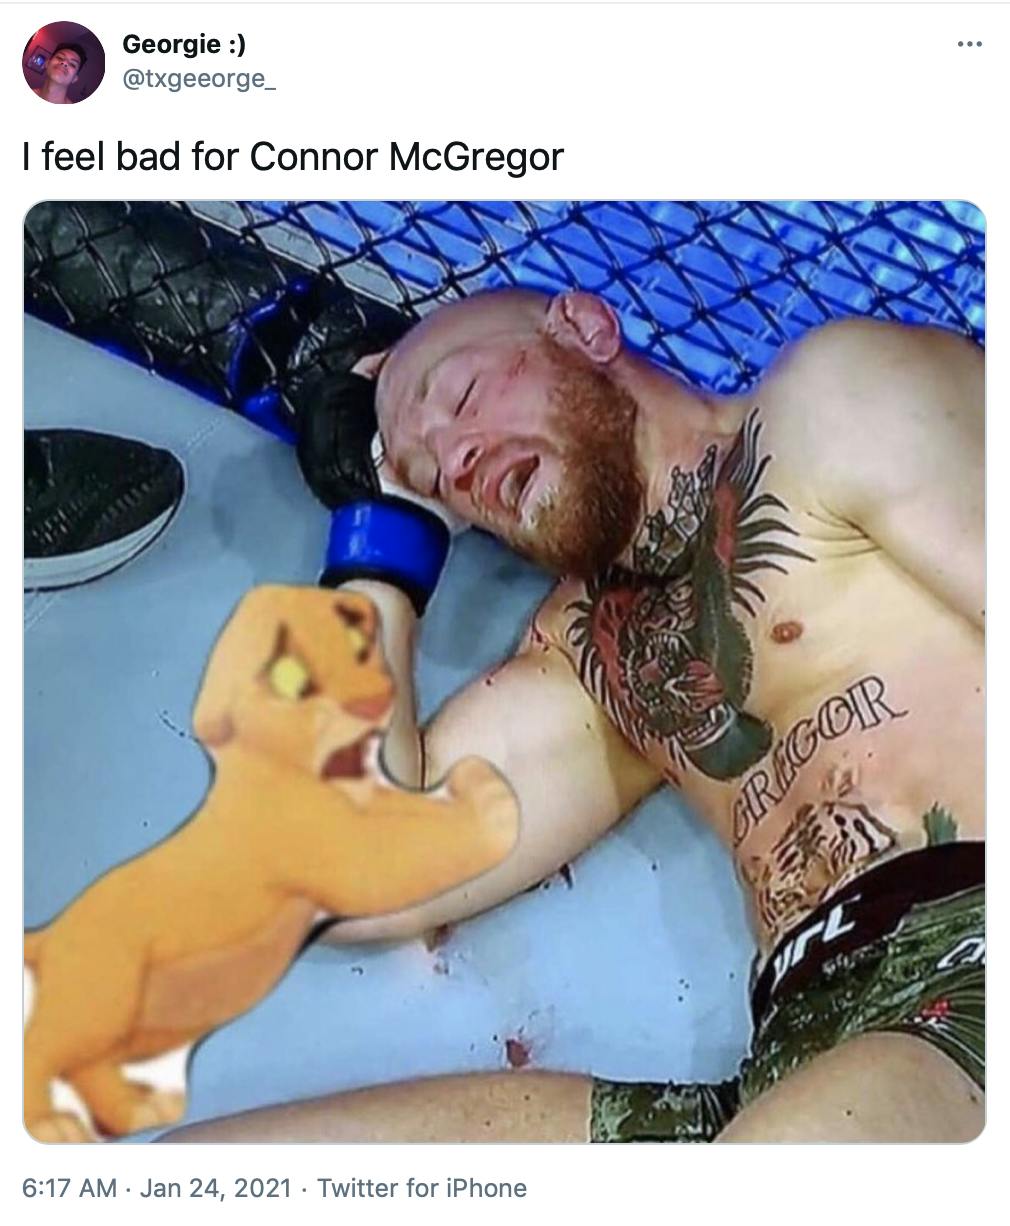 'I feel bad for Connor McGregor' a clip of Simba from the Lion King, a little yellow cartoon lion cub, rearing up on his hind legs and looking devastated with his front paws up on McGregor